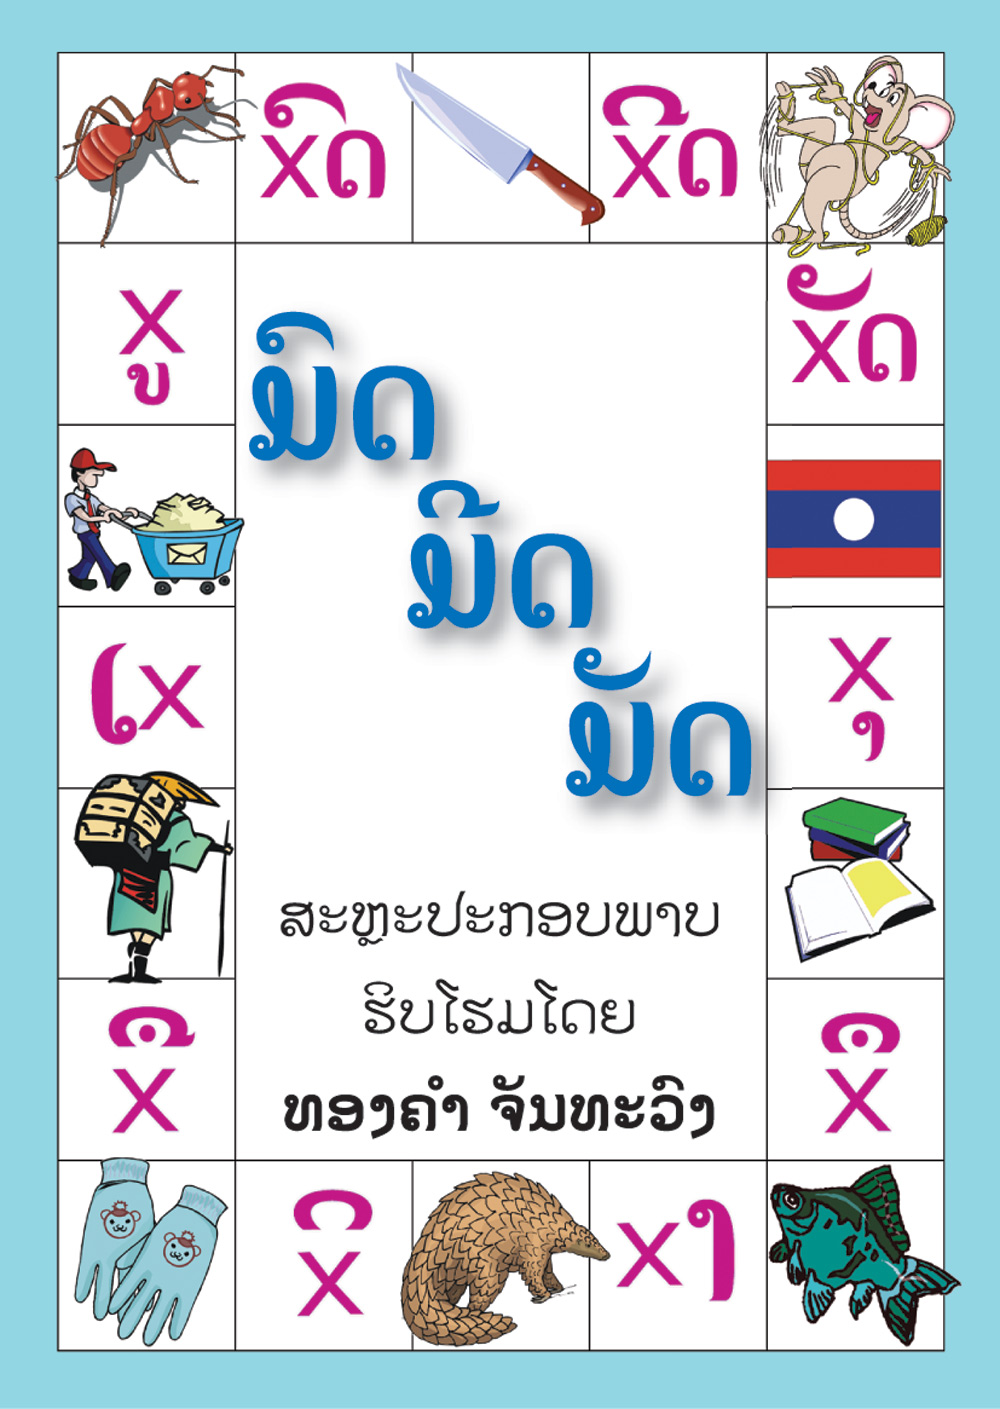 Ant, Knife, Tied Up large book cover, published in Lao language